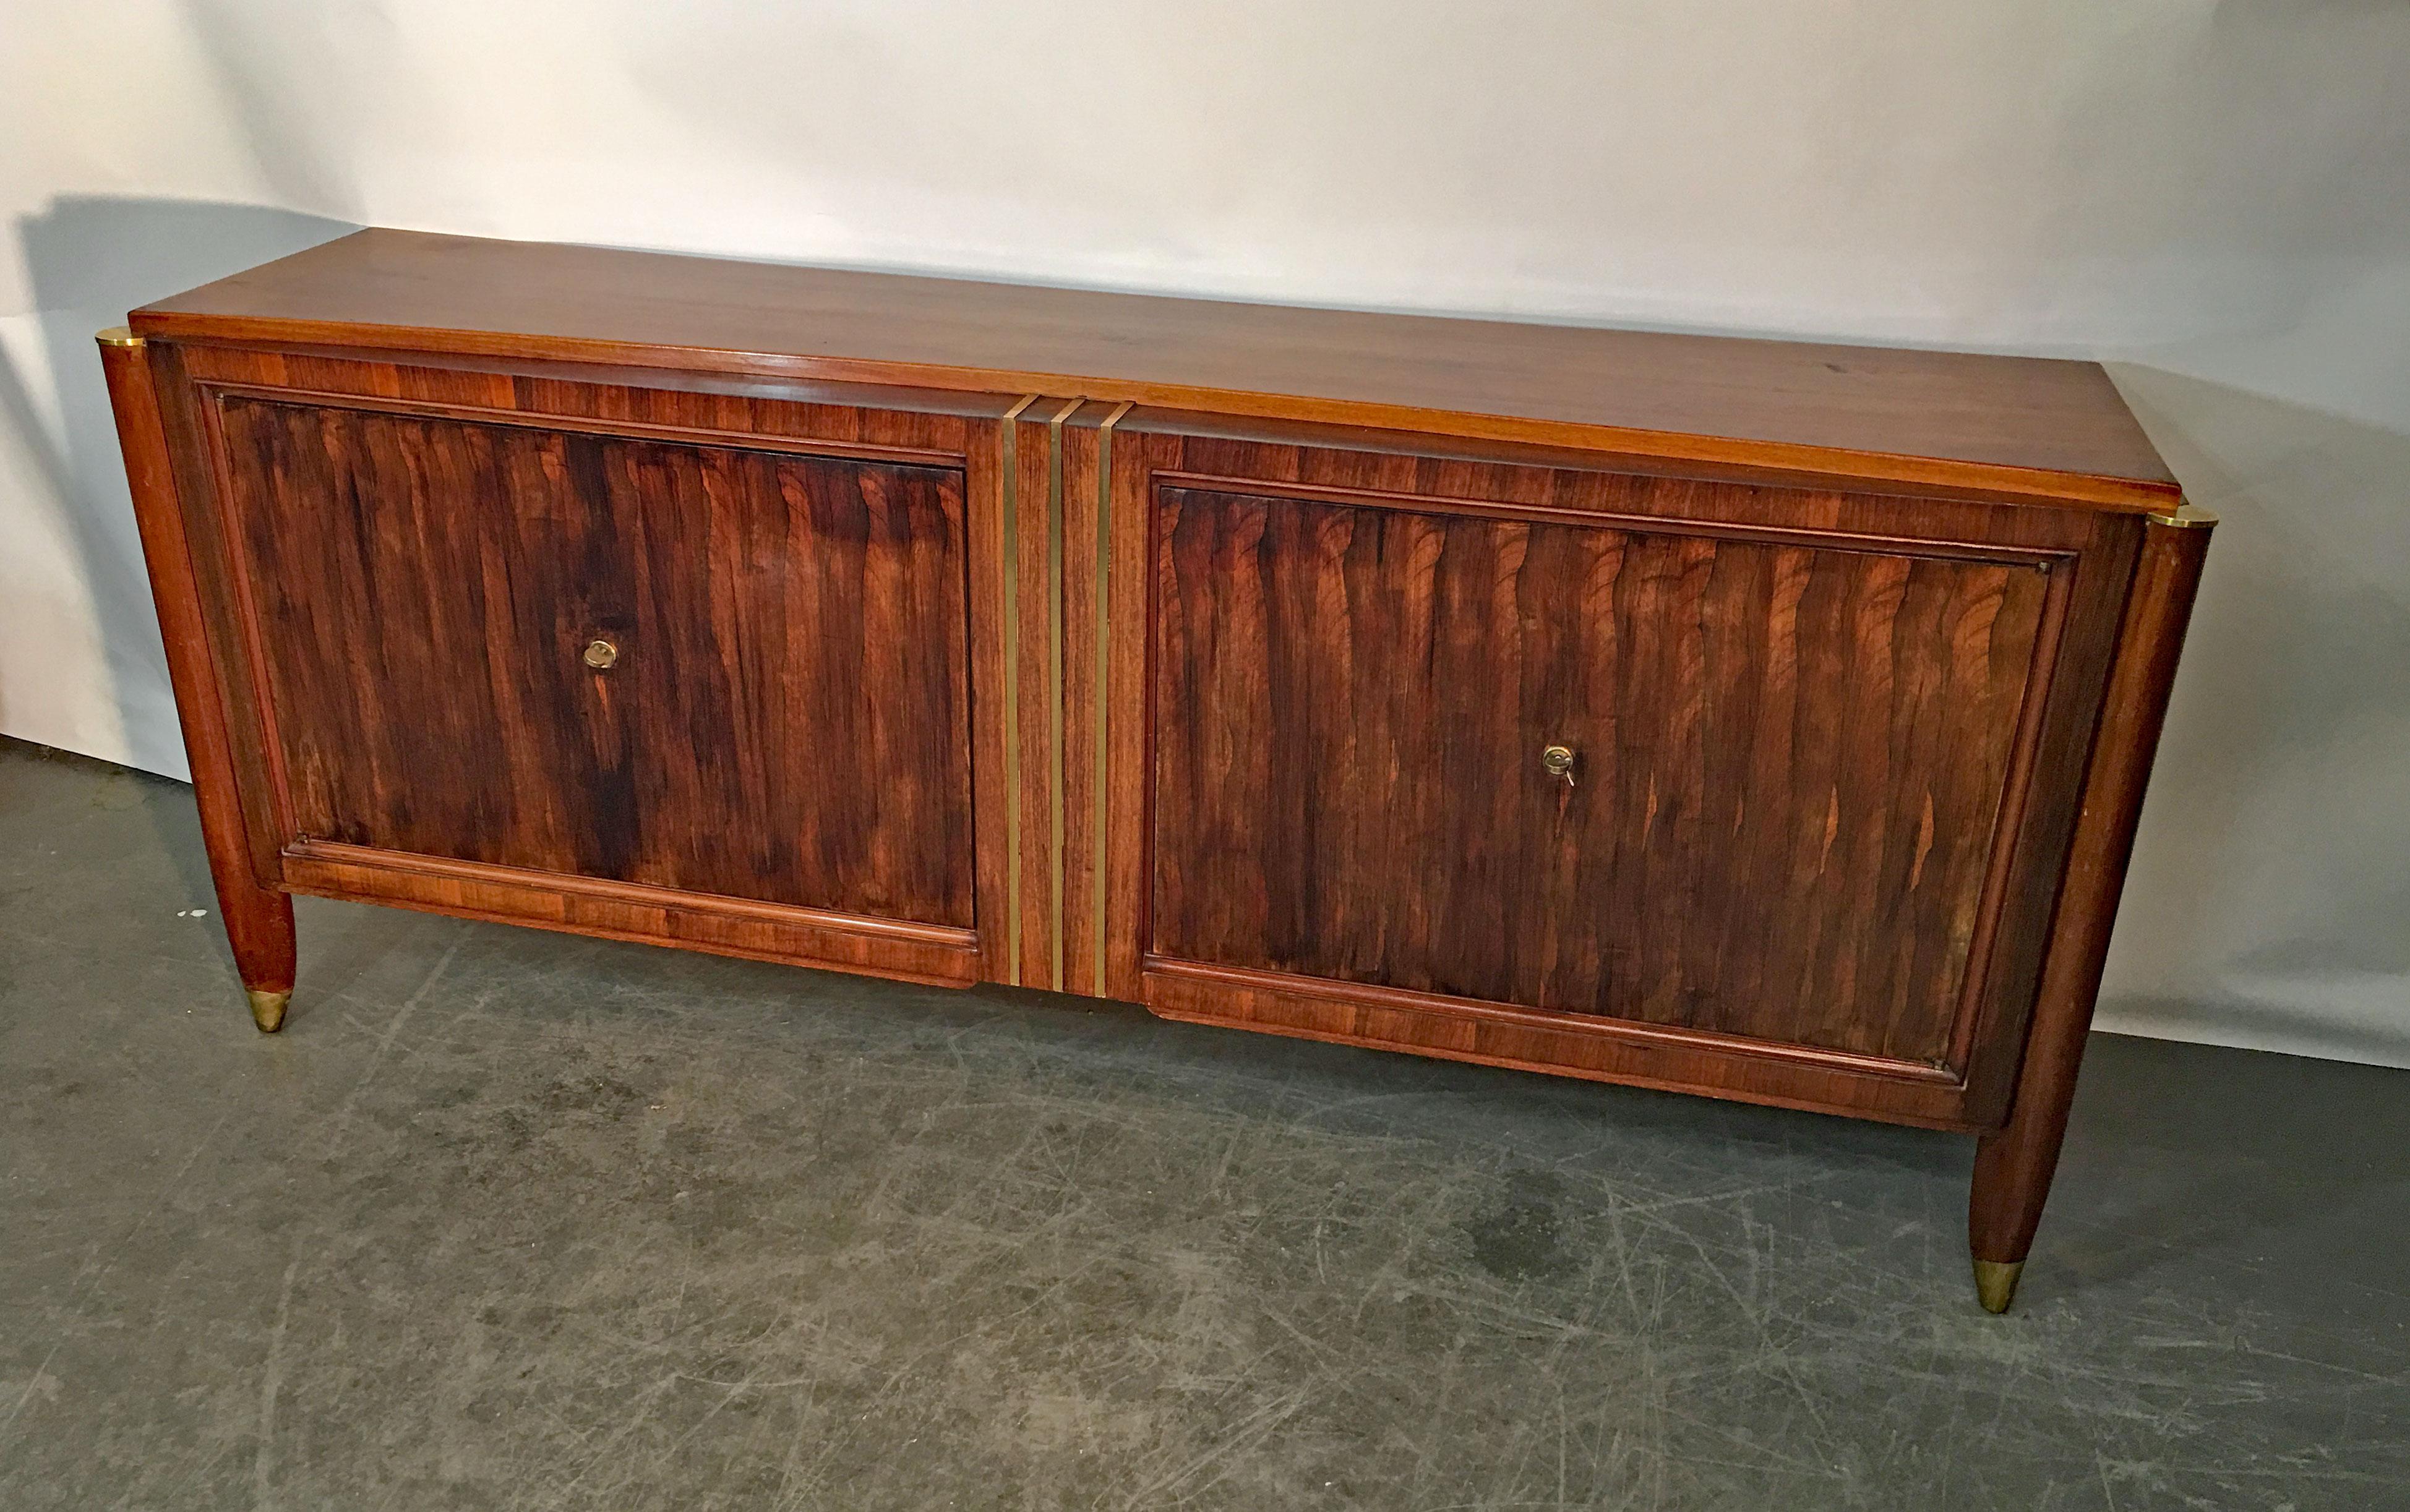 European Art Deco Sideboard in Walnut and Bronze in the Style of Dominique, circa 1930 For Sale